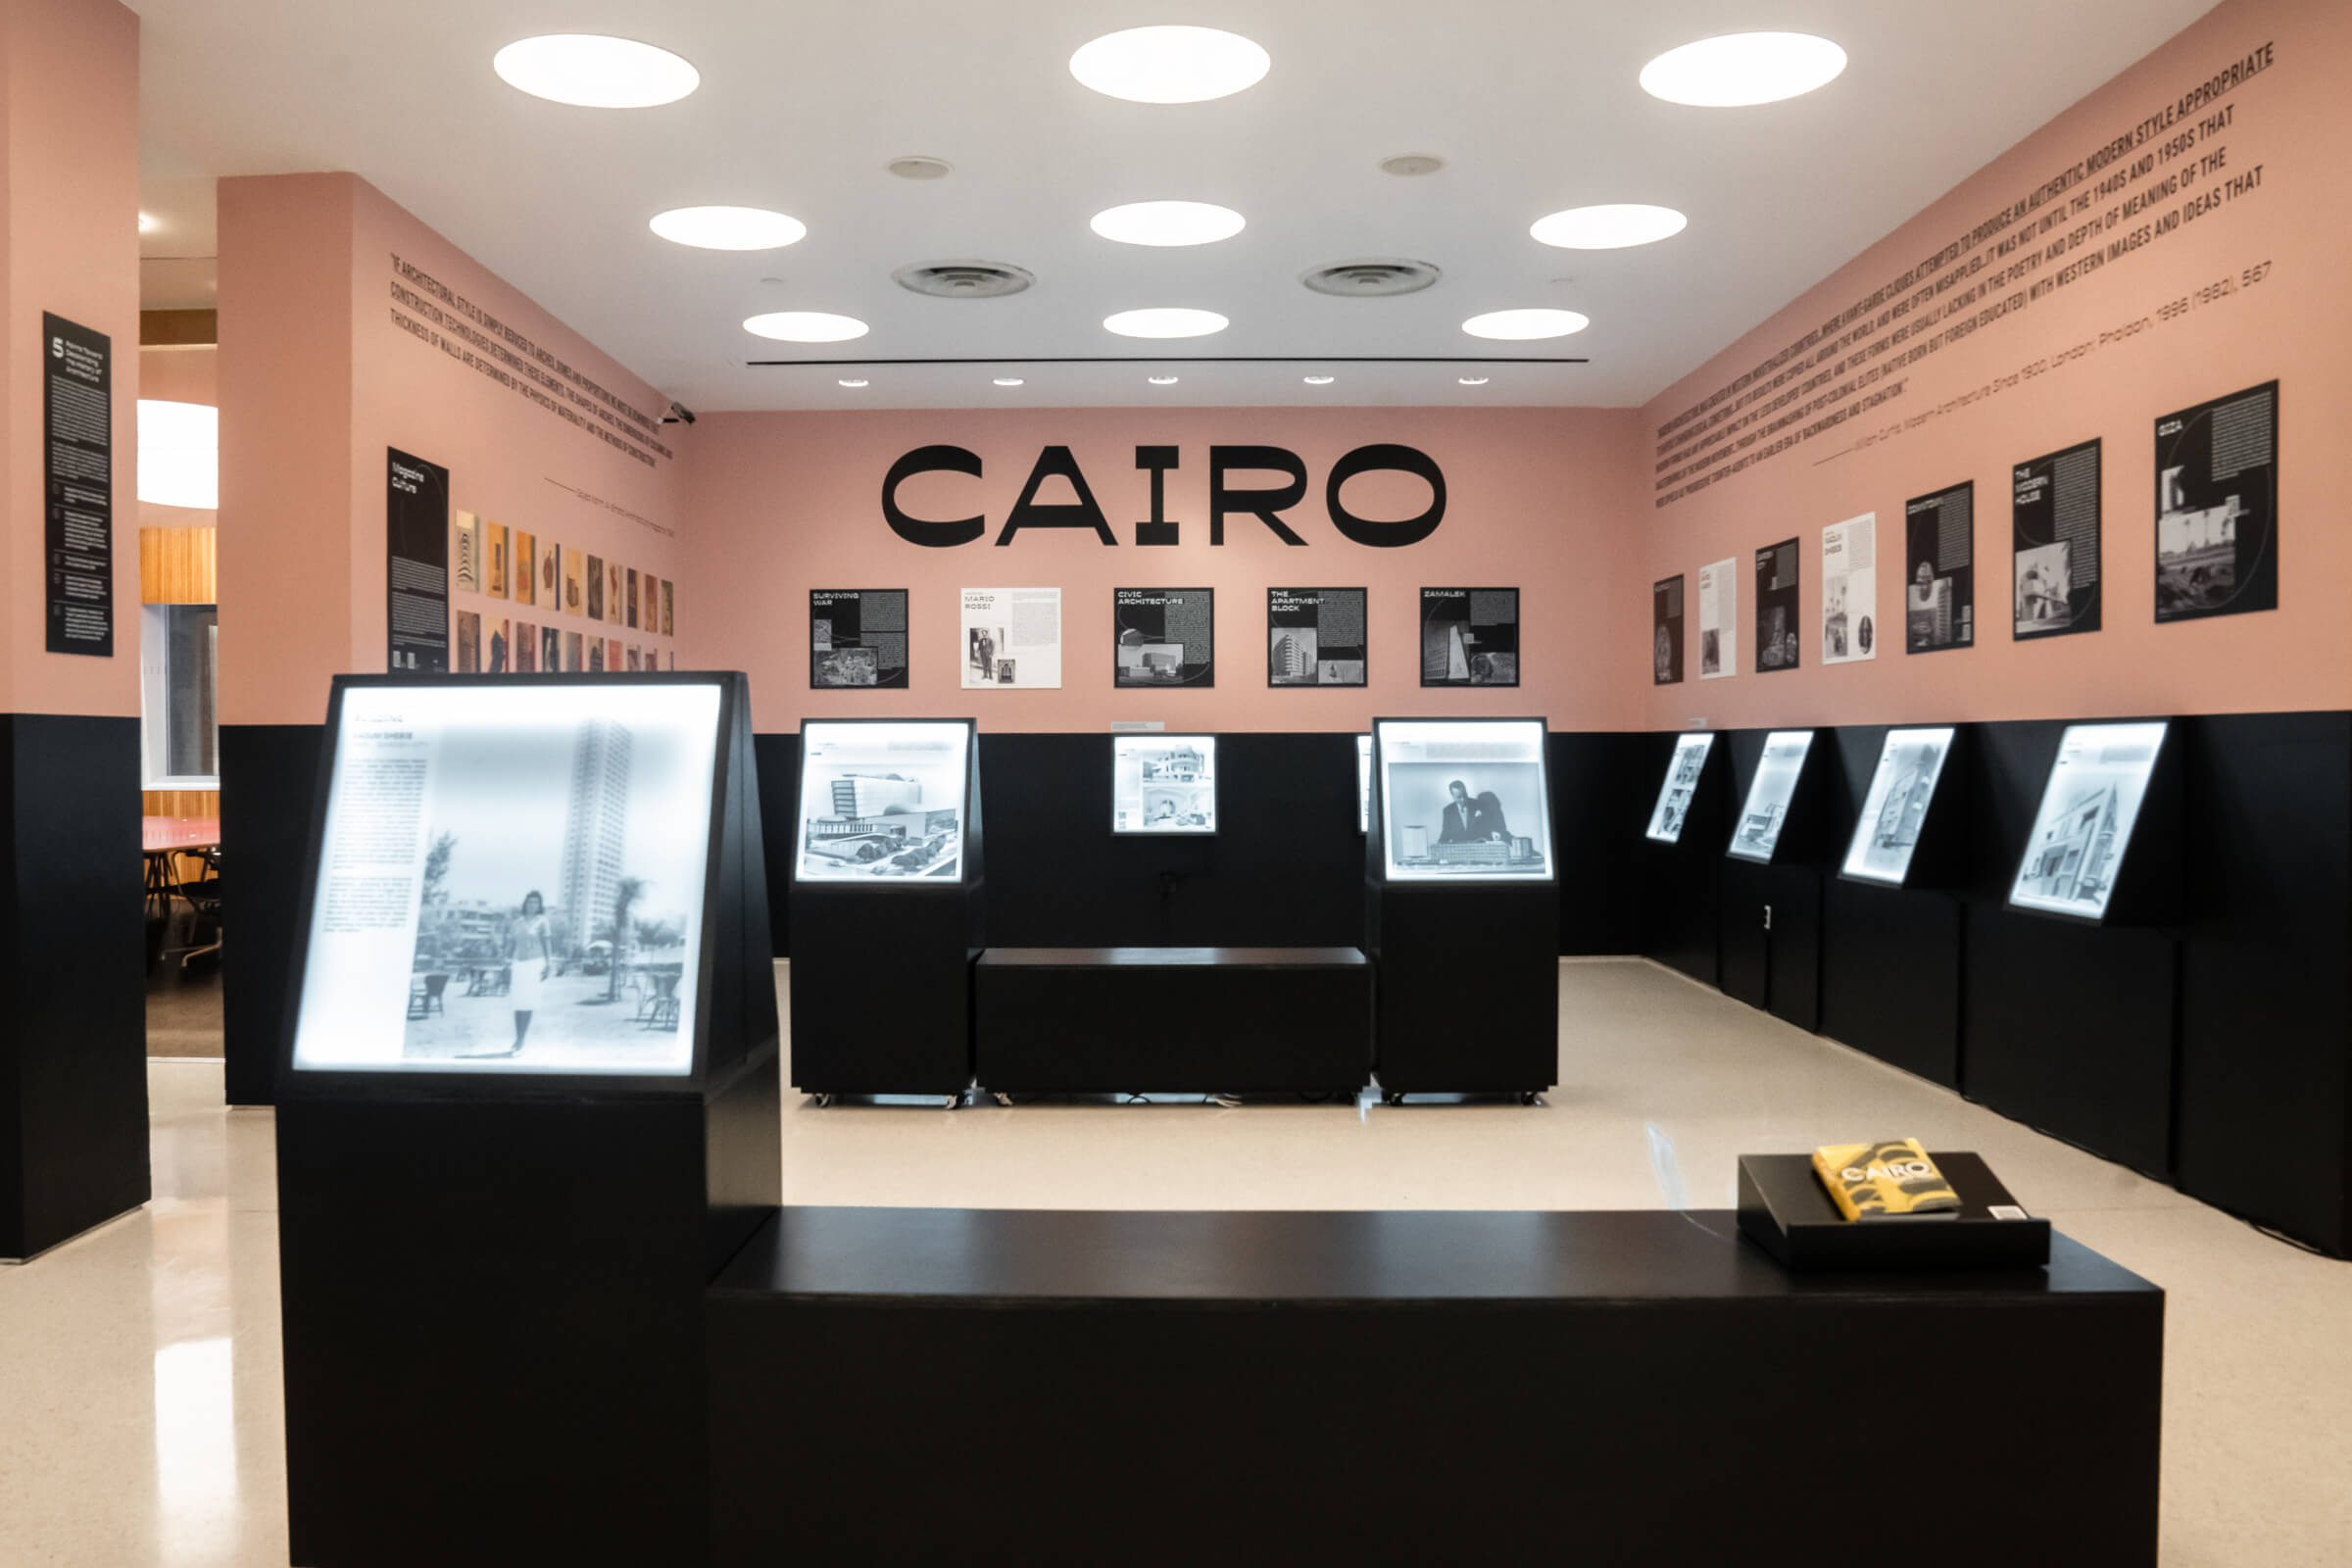 Interior of a pink walled gallery with cairo modern signs